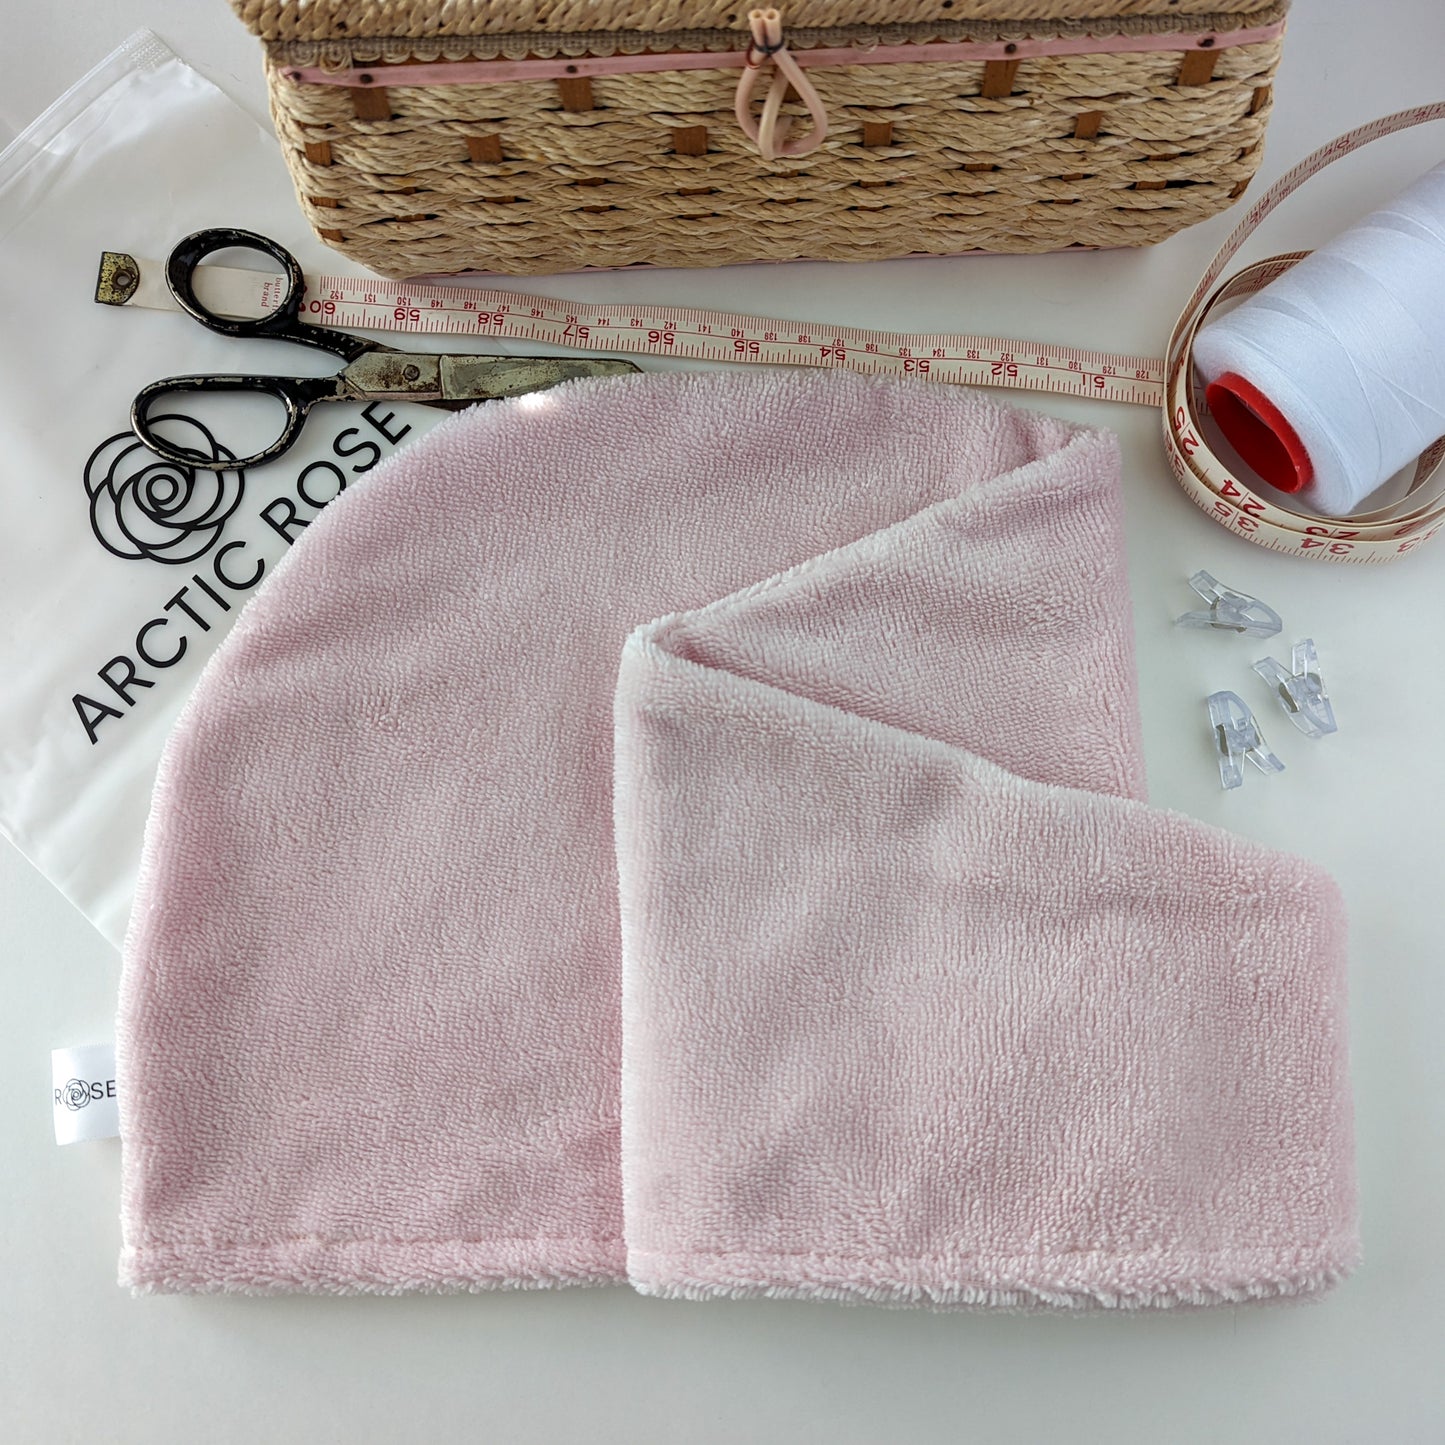 Best luxe microfiber cotton bamboo hair towel hair drying towel wrap turban t-shirt plopping for curly wavy long hair Arctic Rose head towel wrap made in Canada, the perfect travel hair towel matching towel scrunchies available